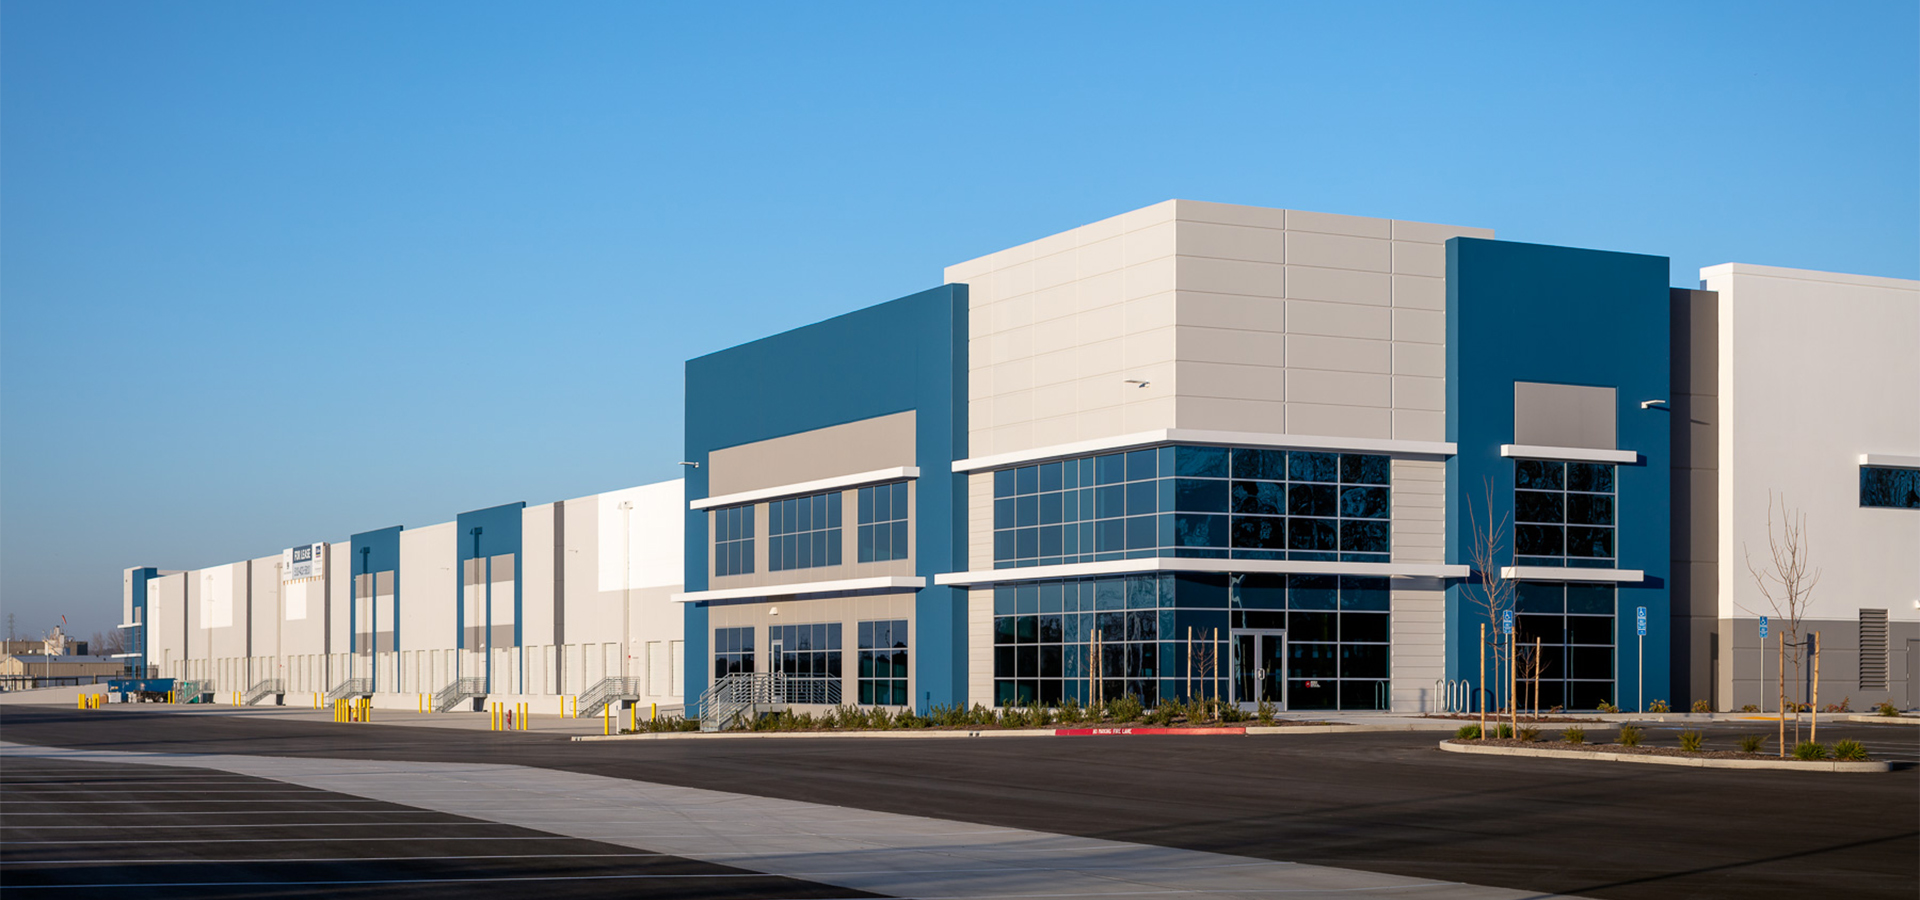 McShane Completes Industrial Facility in Richmond, California